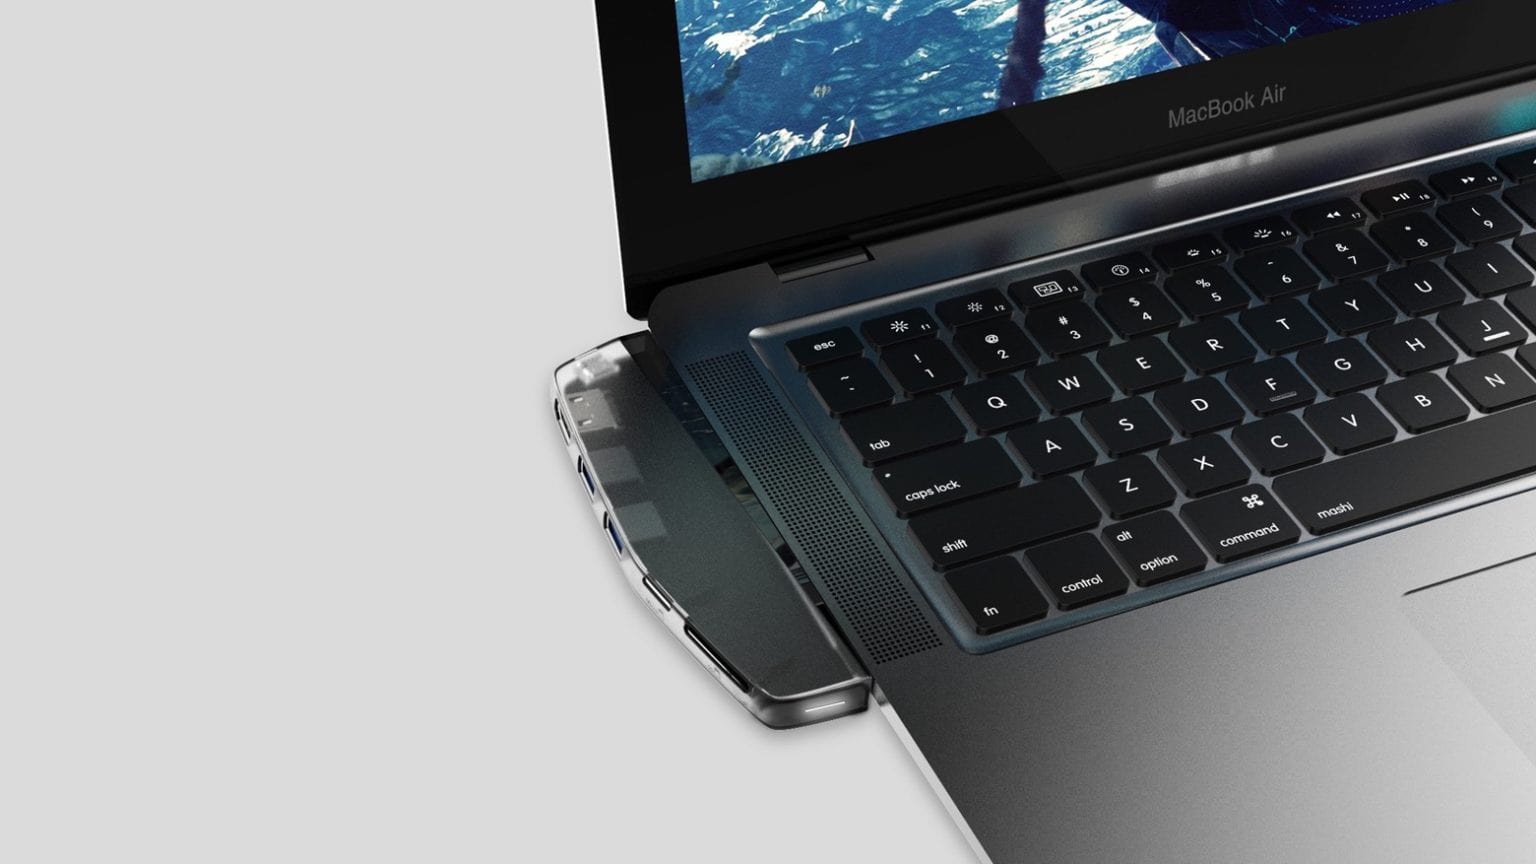 HybridDrive adds an SSD to your MacBook